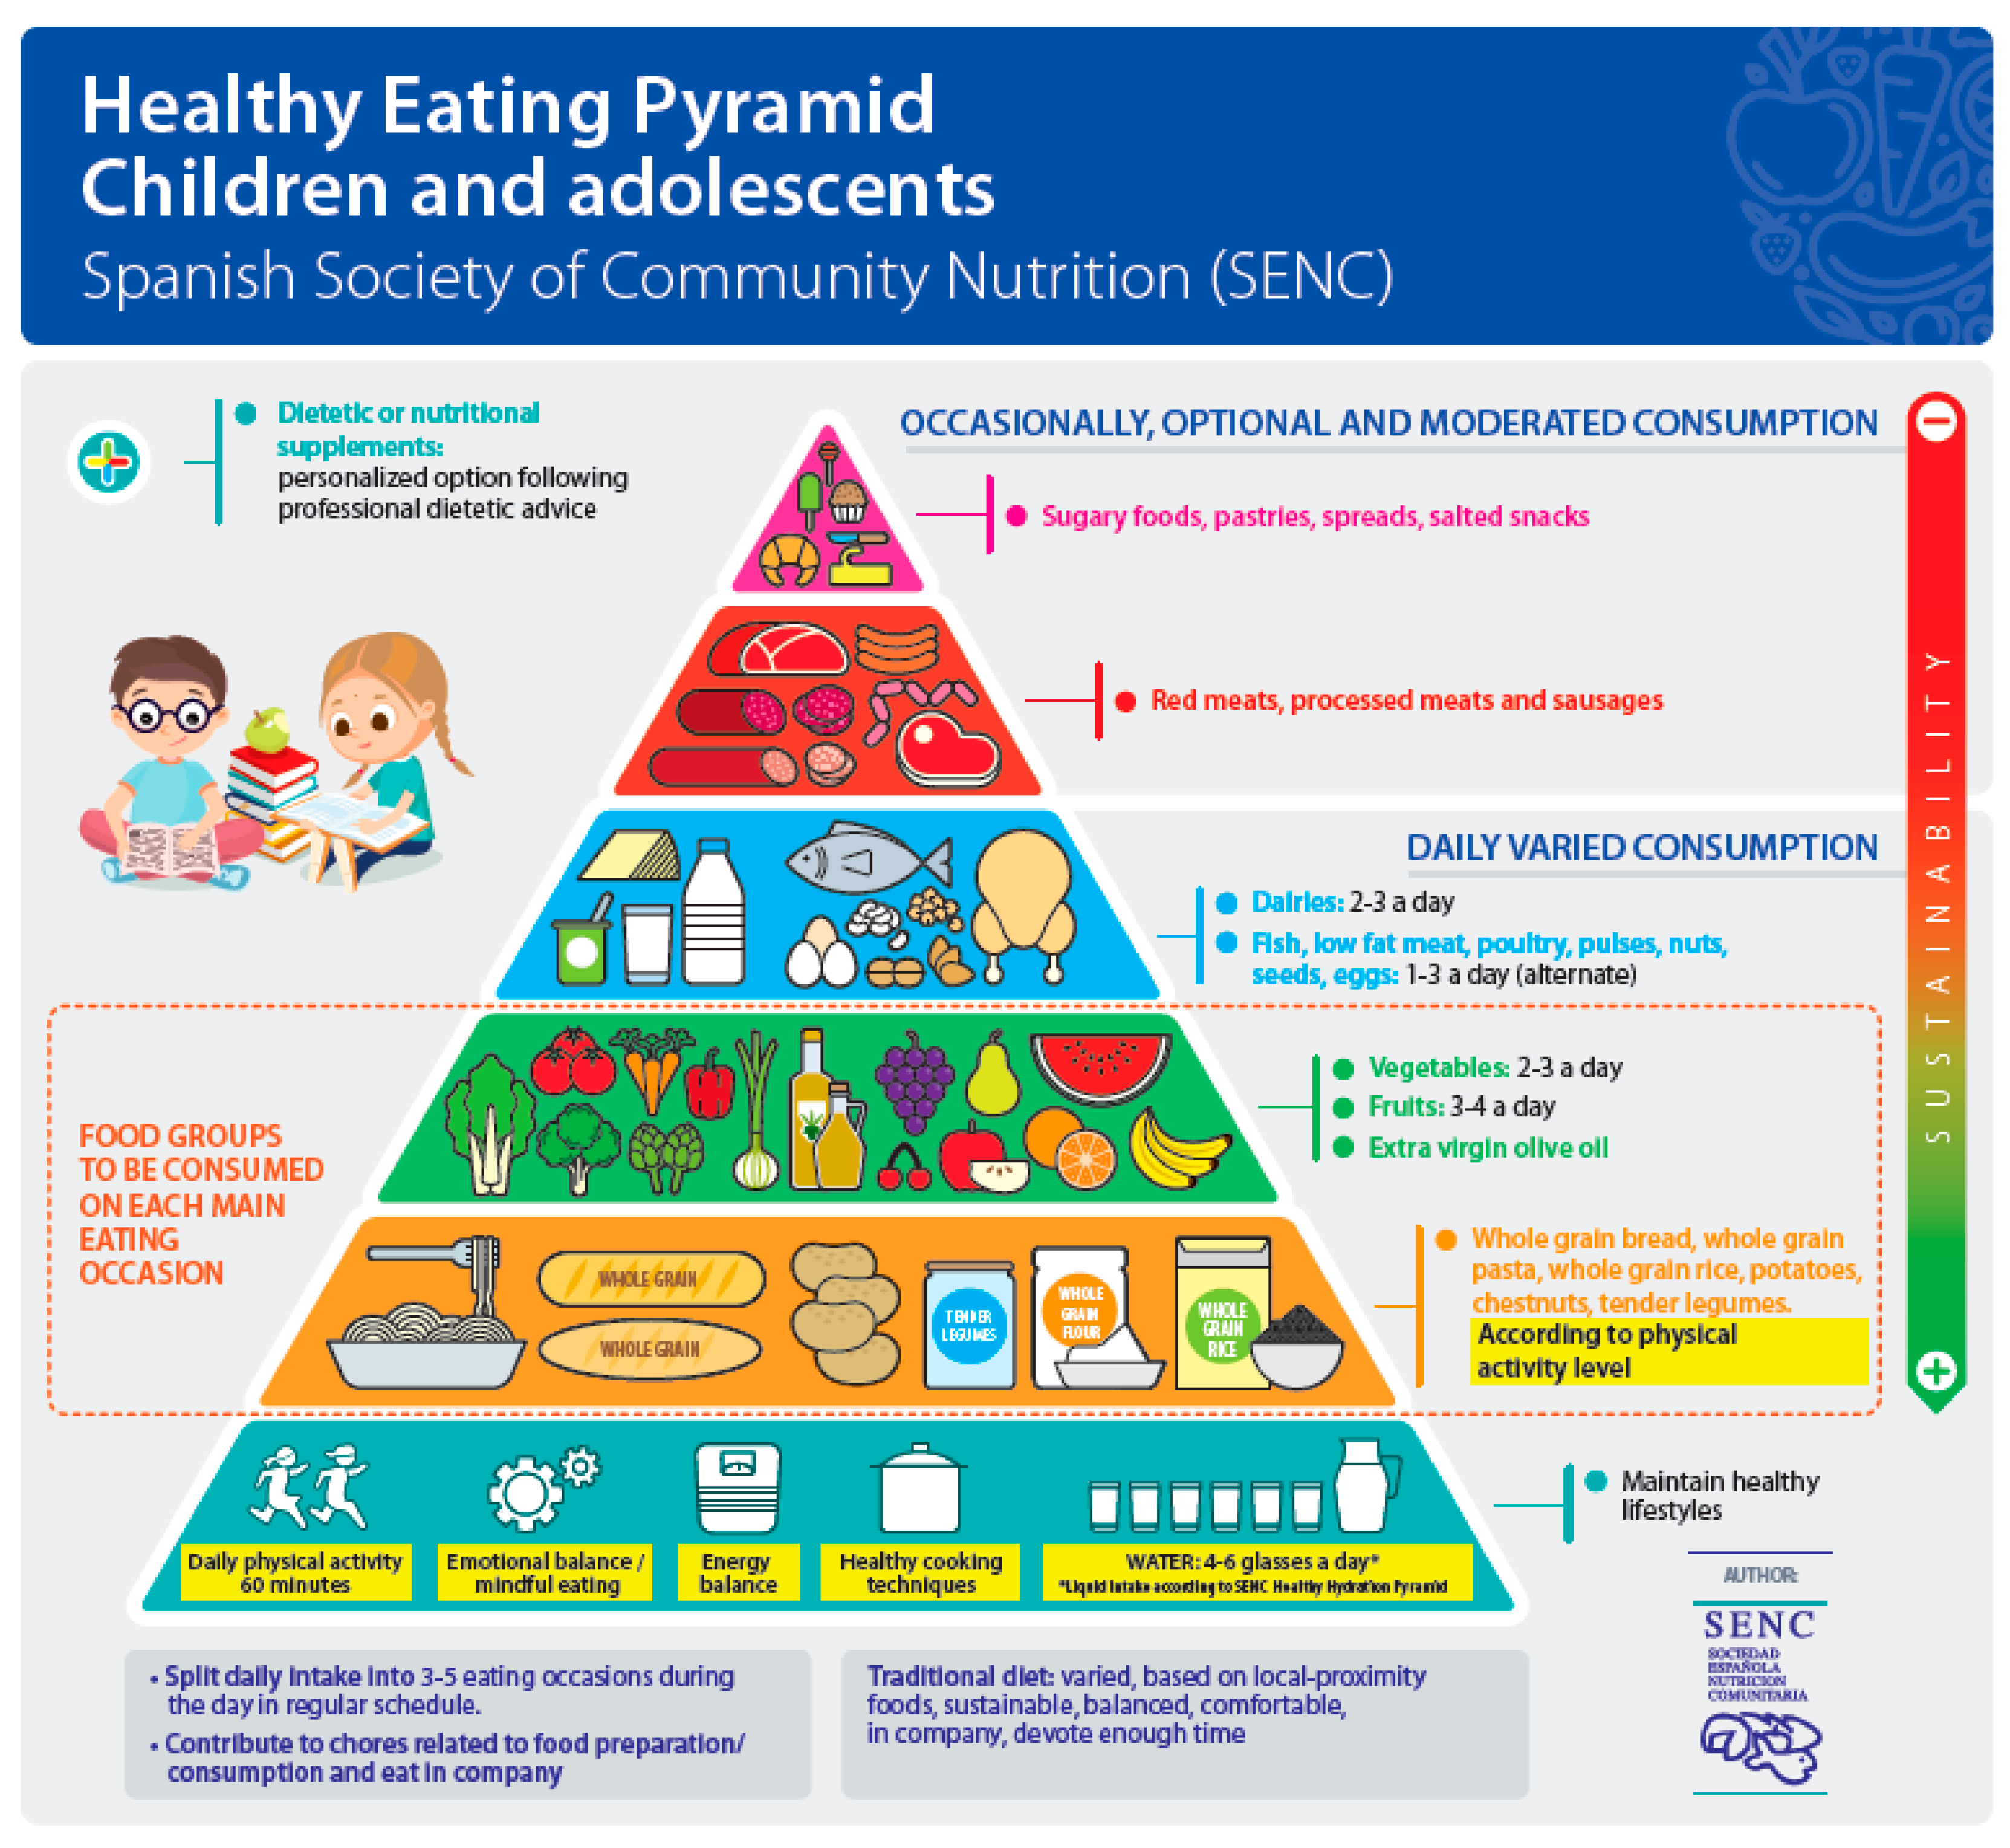 Healthy Eating Pyramid for Children and Adolescents